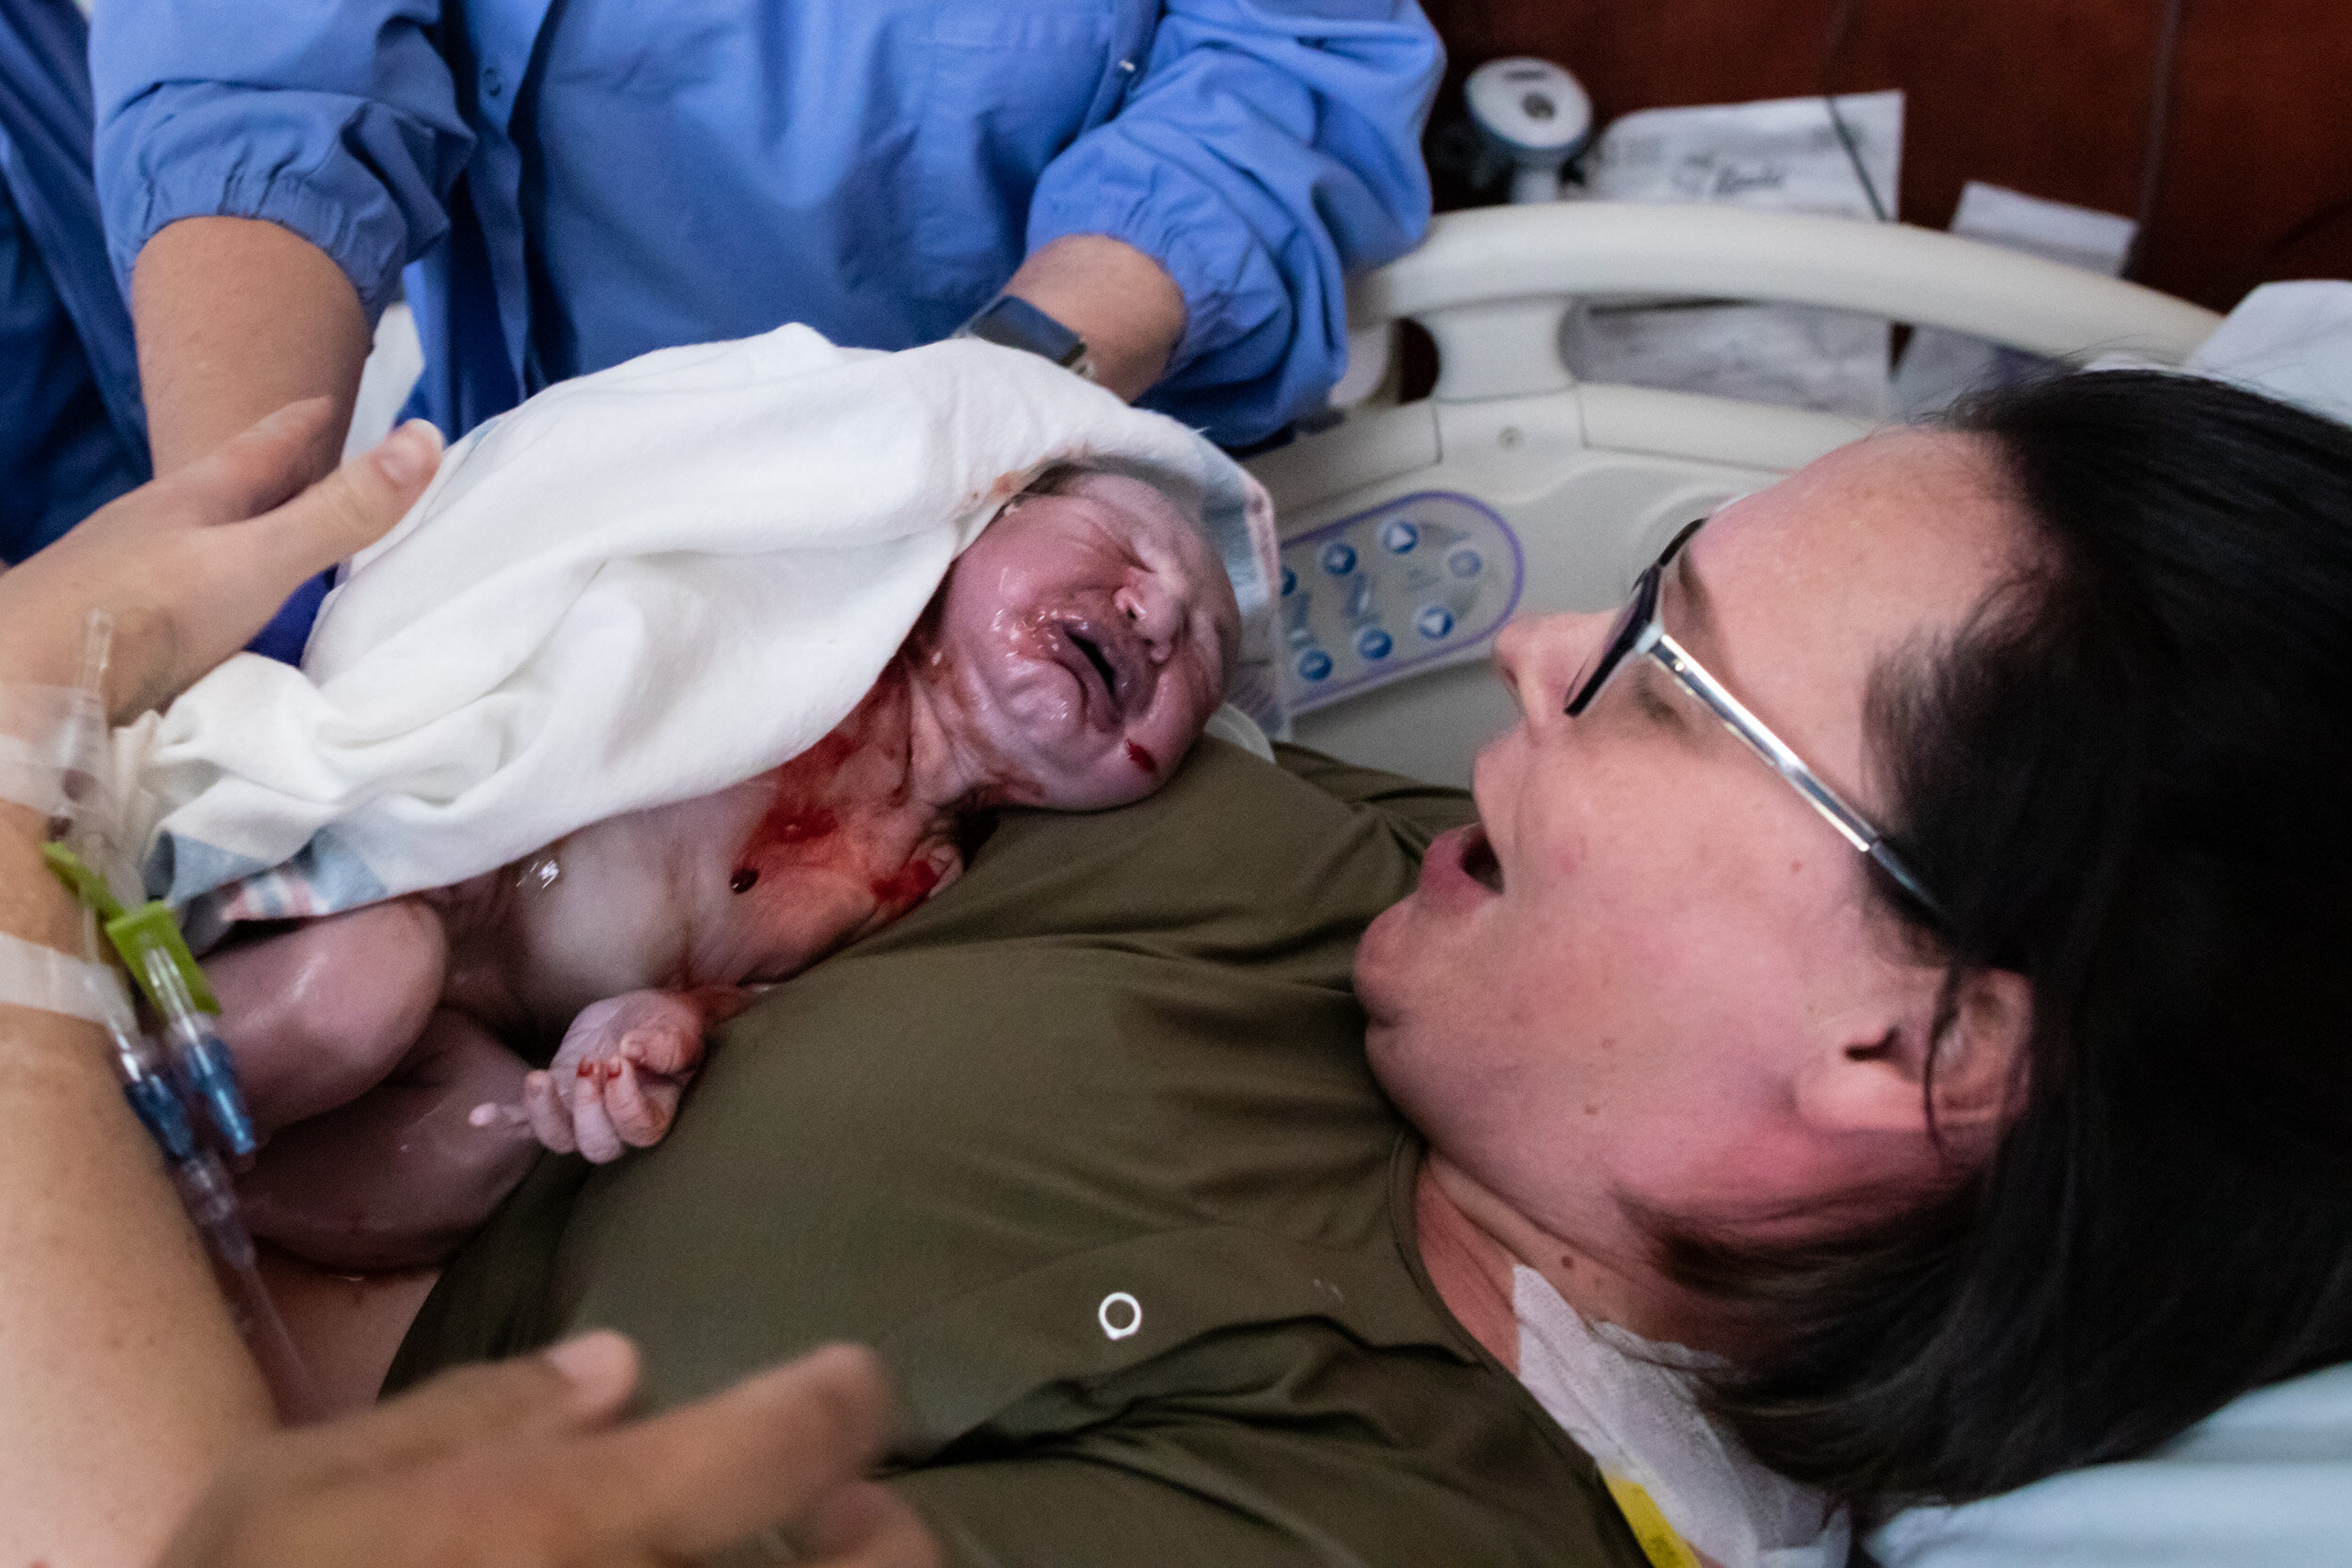 Jacksonville mom with joyful look on her face while she holds newborn infant